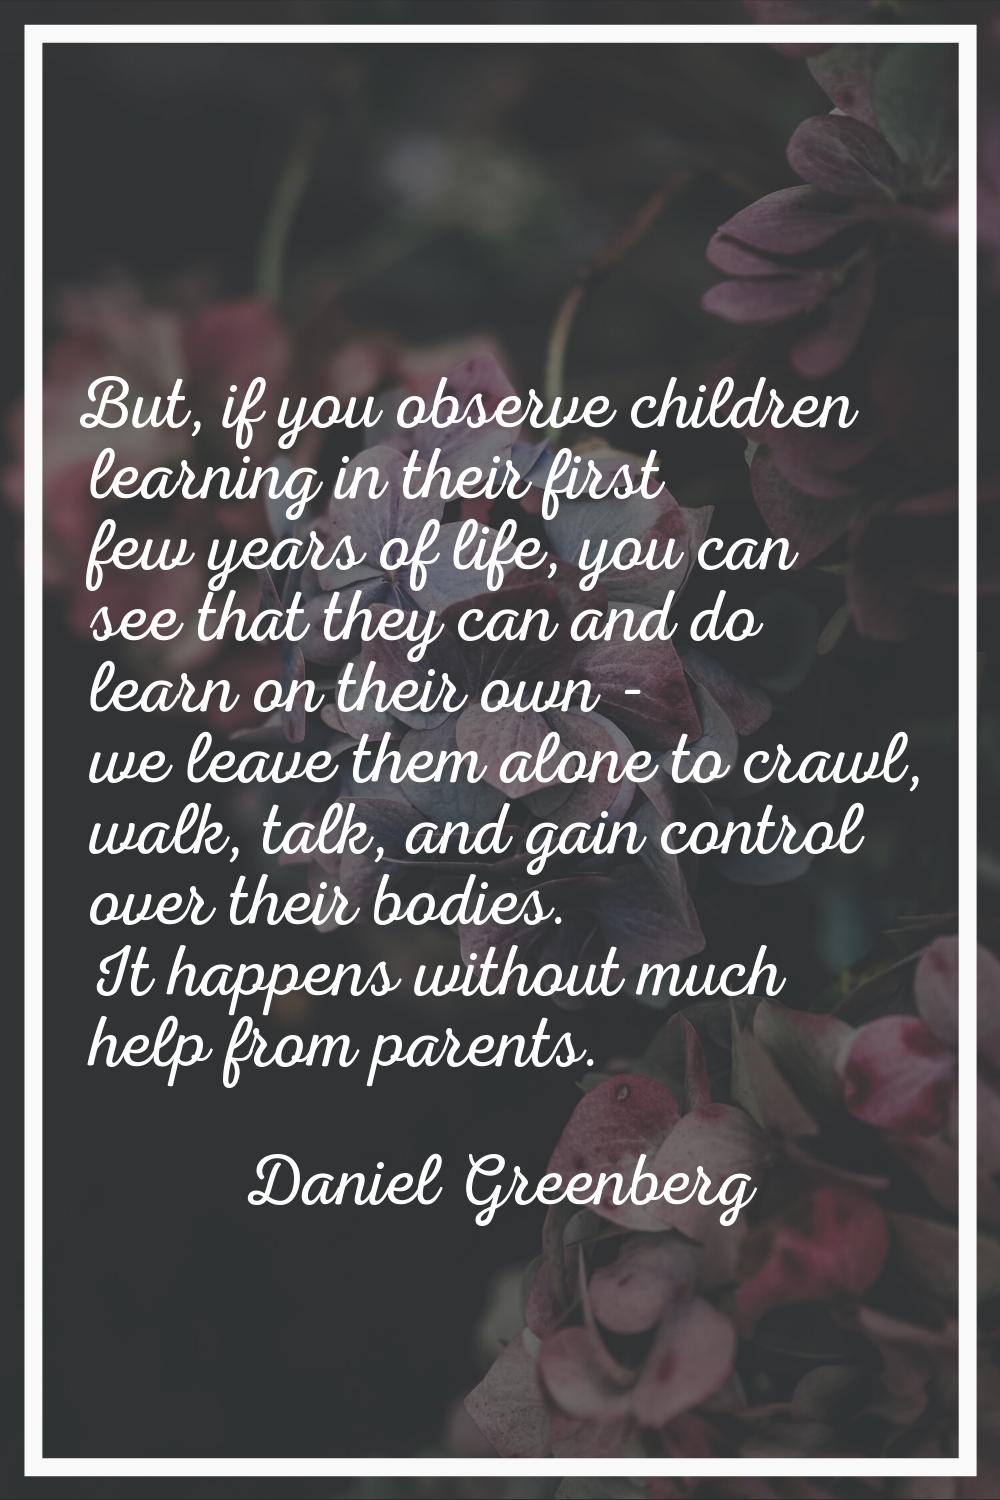 But, if you observe children learning in their first few years of life, you can see that they can a